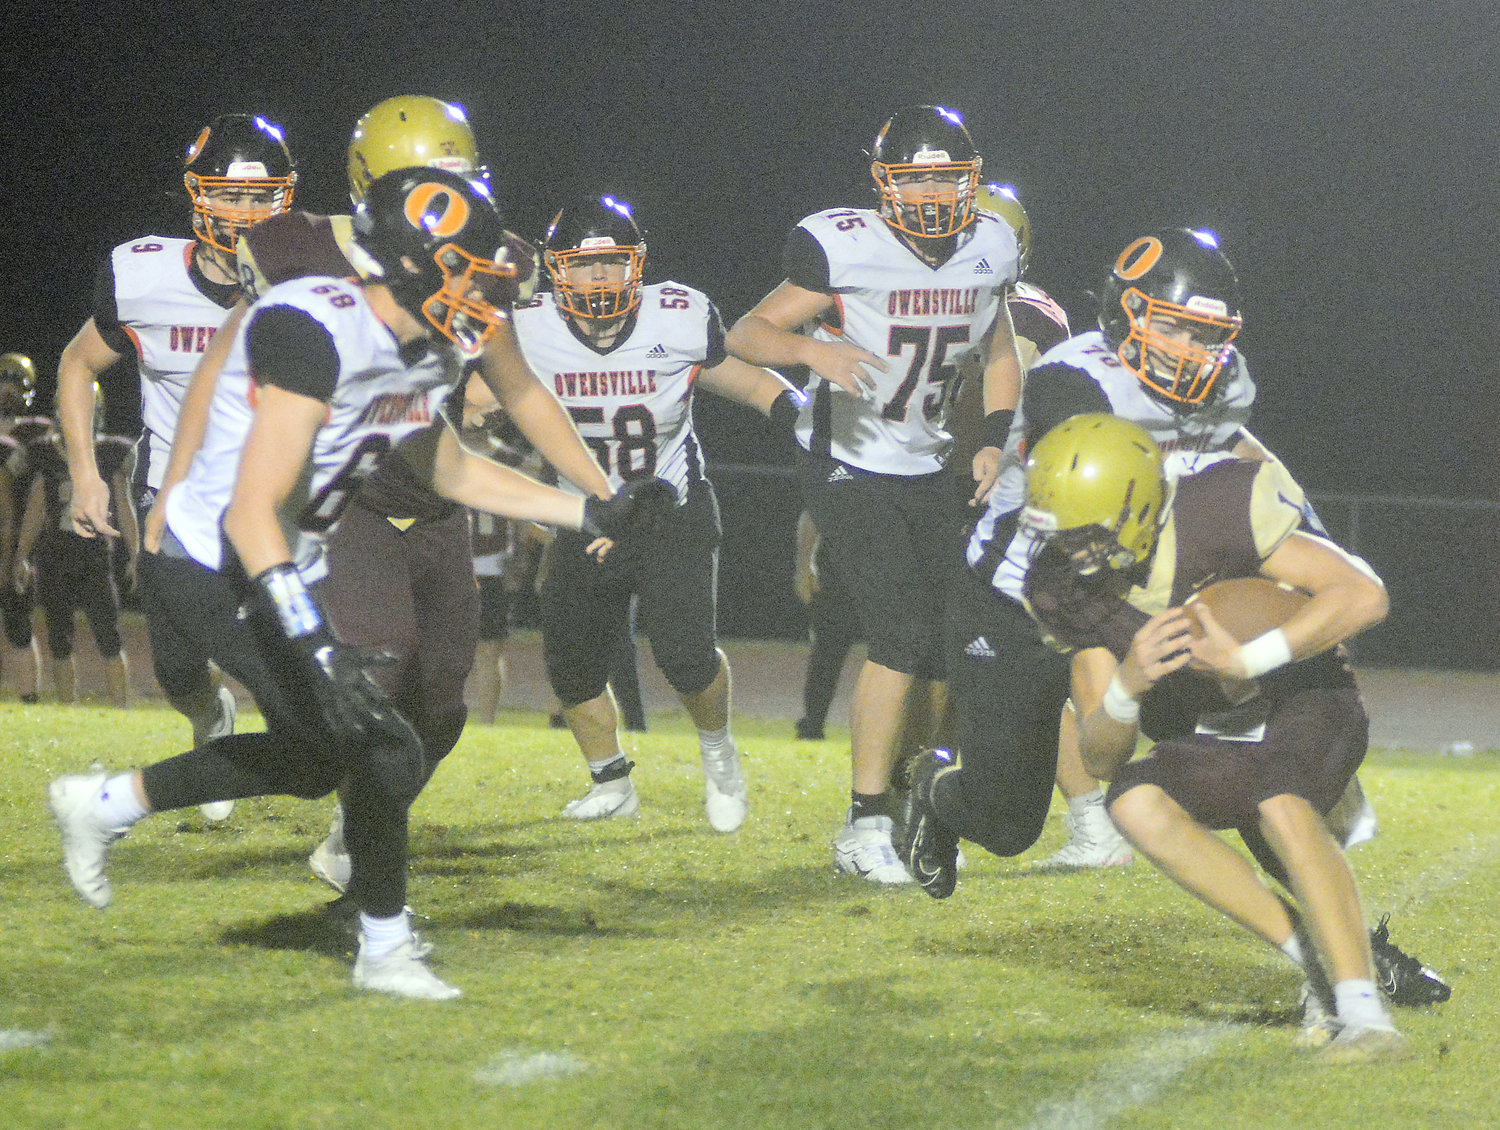 Helmig (far right) also got in on several defensive plays including the one shown below on the road at Eldon.